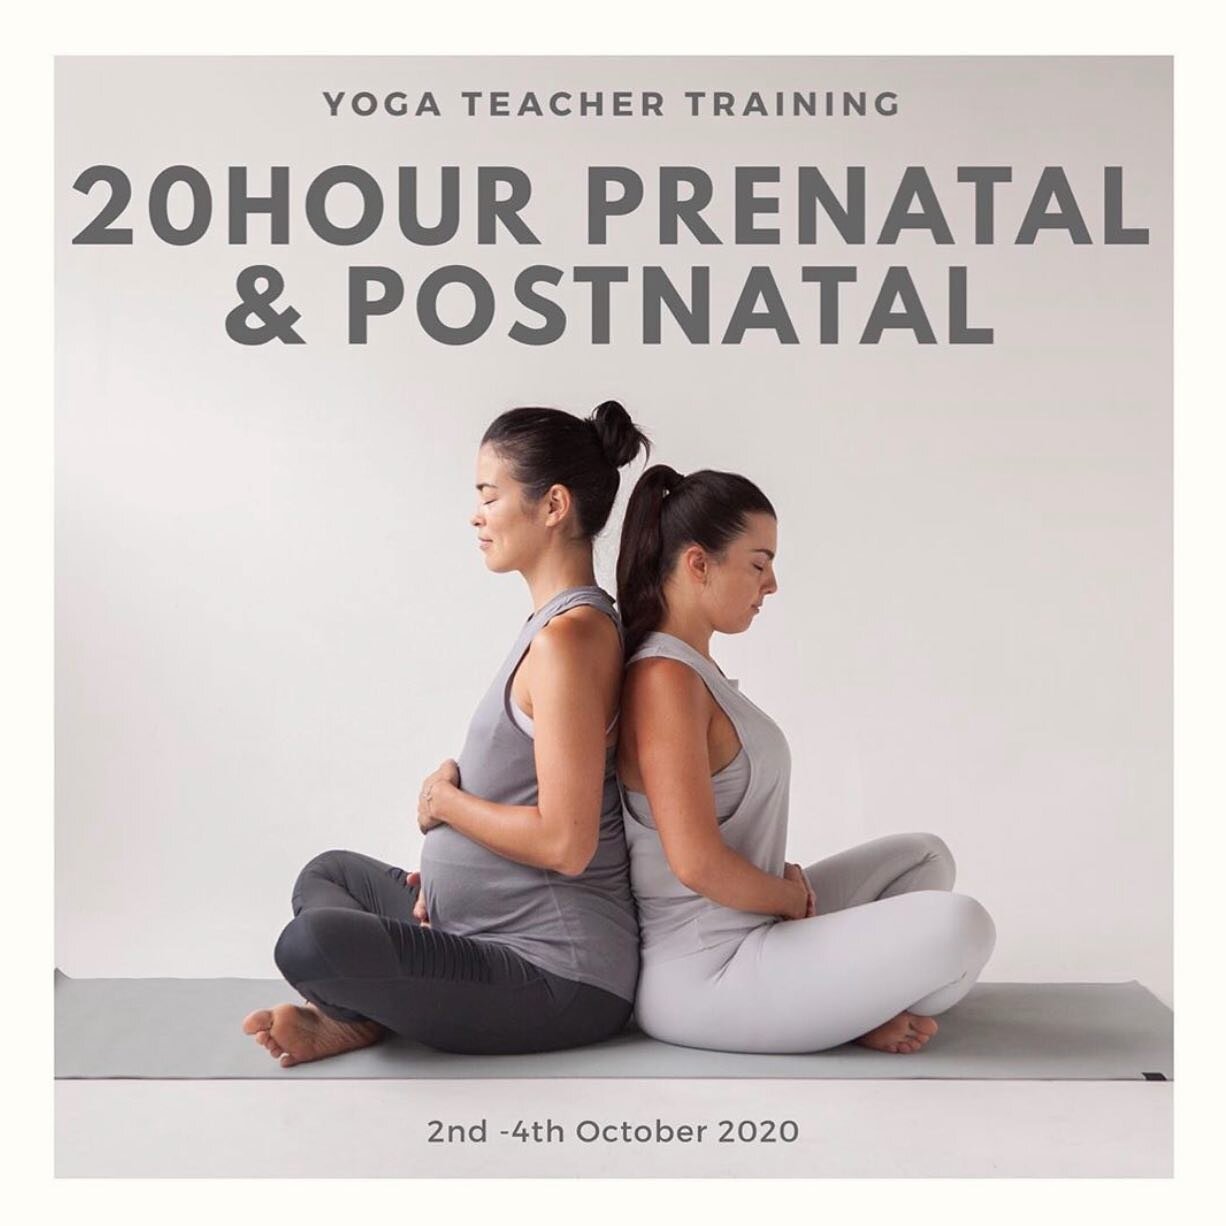 PRENATAL &amp; POSTNATAL YOGA TEACHER TRAINING
October 2nd- 4th  11am - 6pm daily 
.
There are over 300,000 women pregnant 🤰 having babies in Australia 🇦🇺 which means that is it highly likely one of them might walk into your yoga class 🙏🏼
.
This